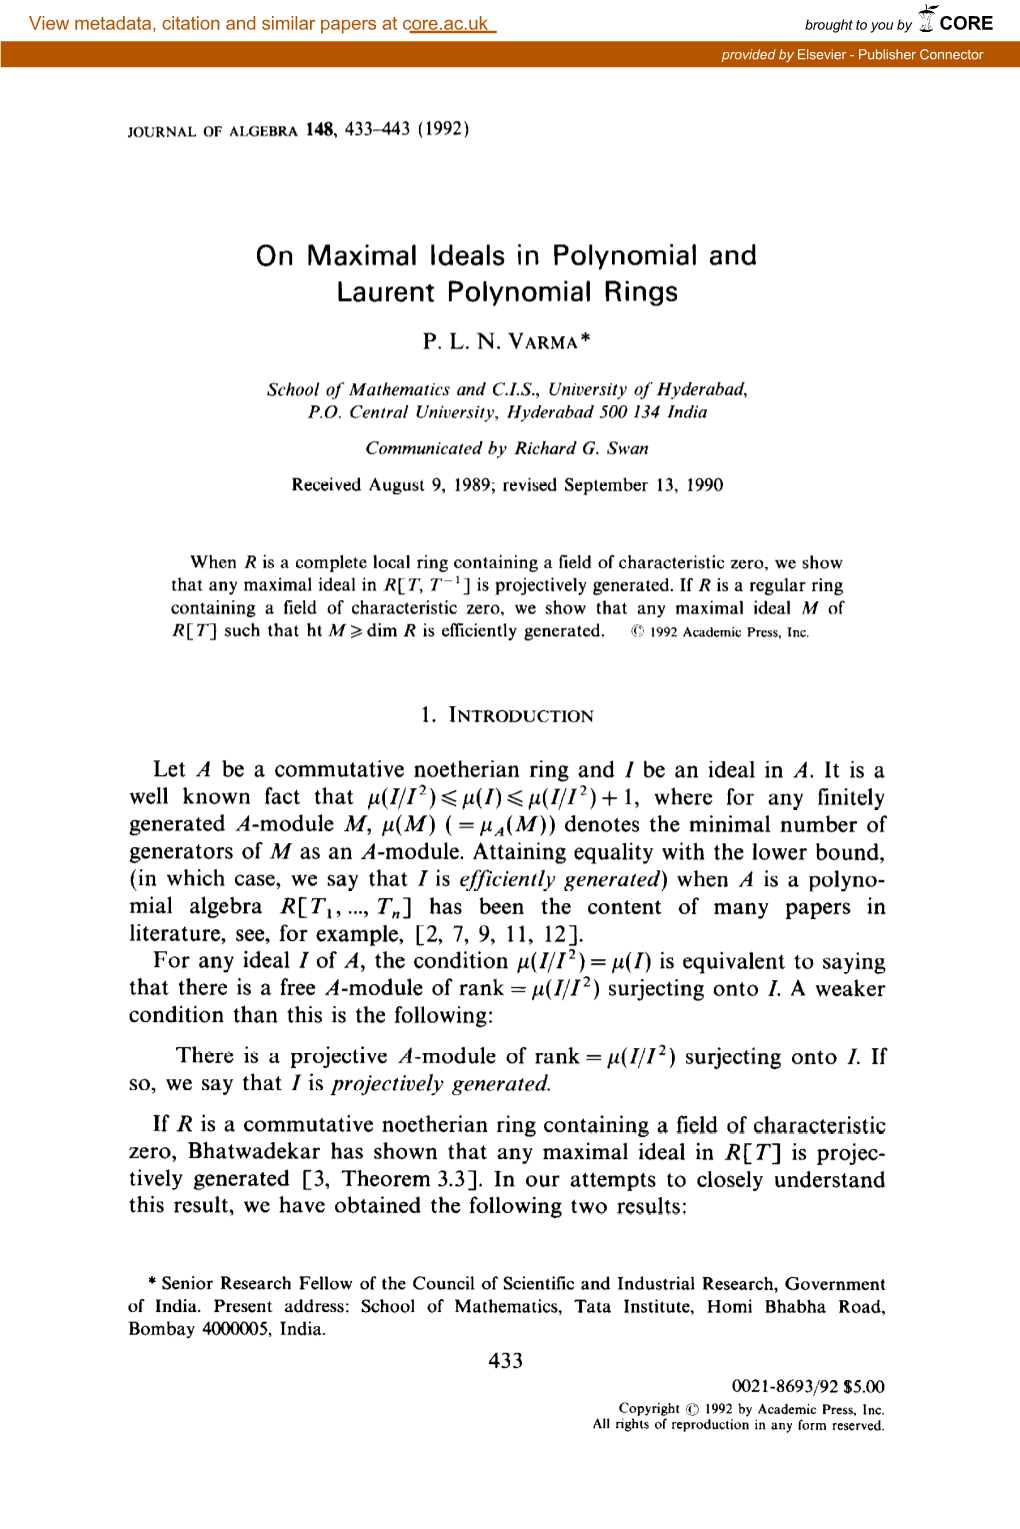 On Maximal Ideals in Polynomial and Laurent Polynomial Rings